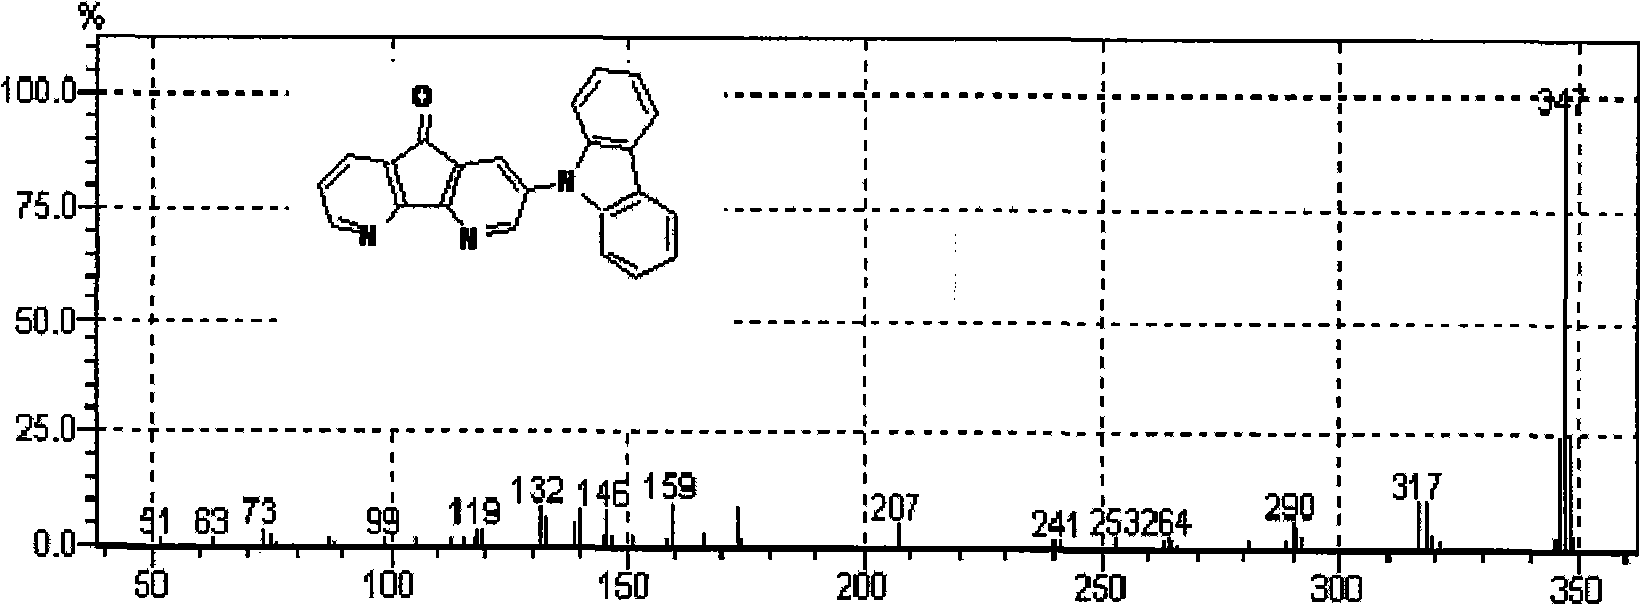 Carbazole organic semiconductor materials, methods for preparing and using same